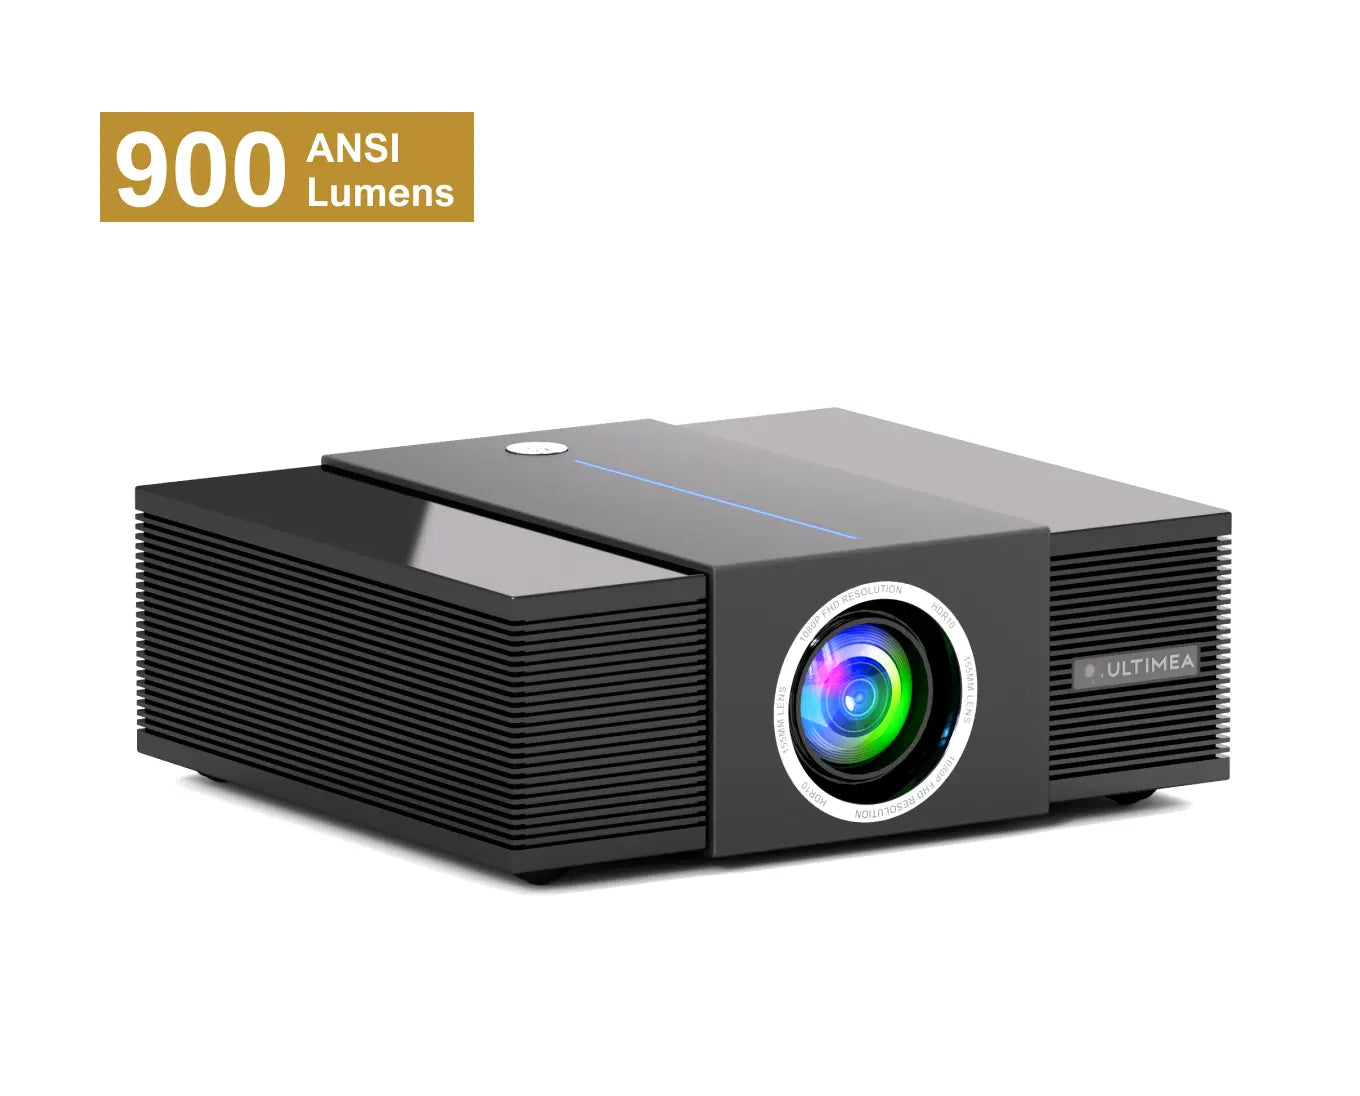 ULTIMEA Apollo P40 Projector - One of THE BEST I've Tested! 